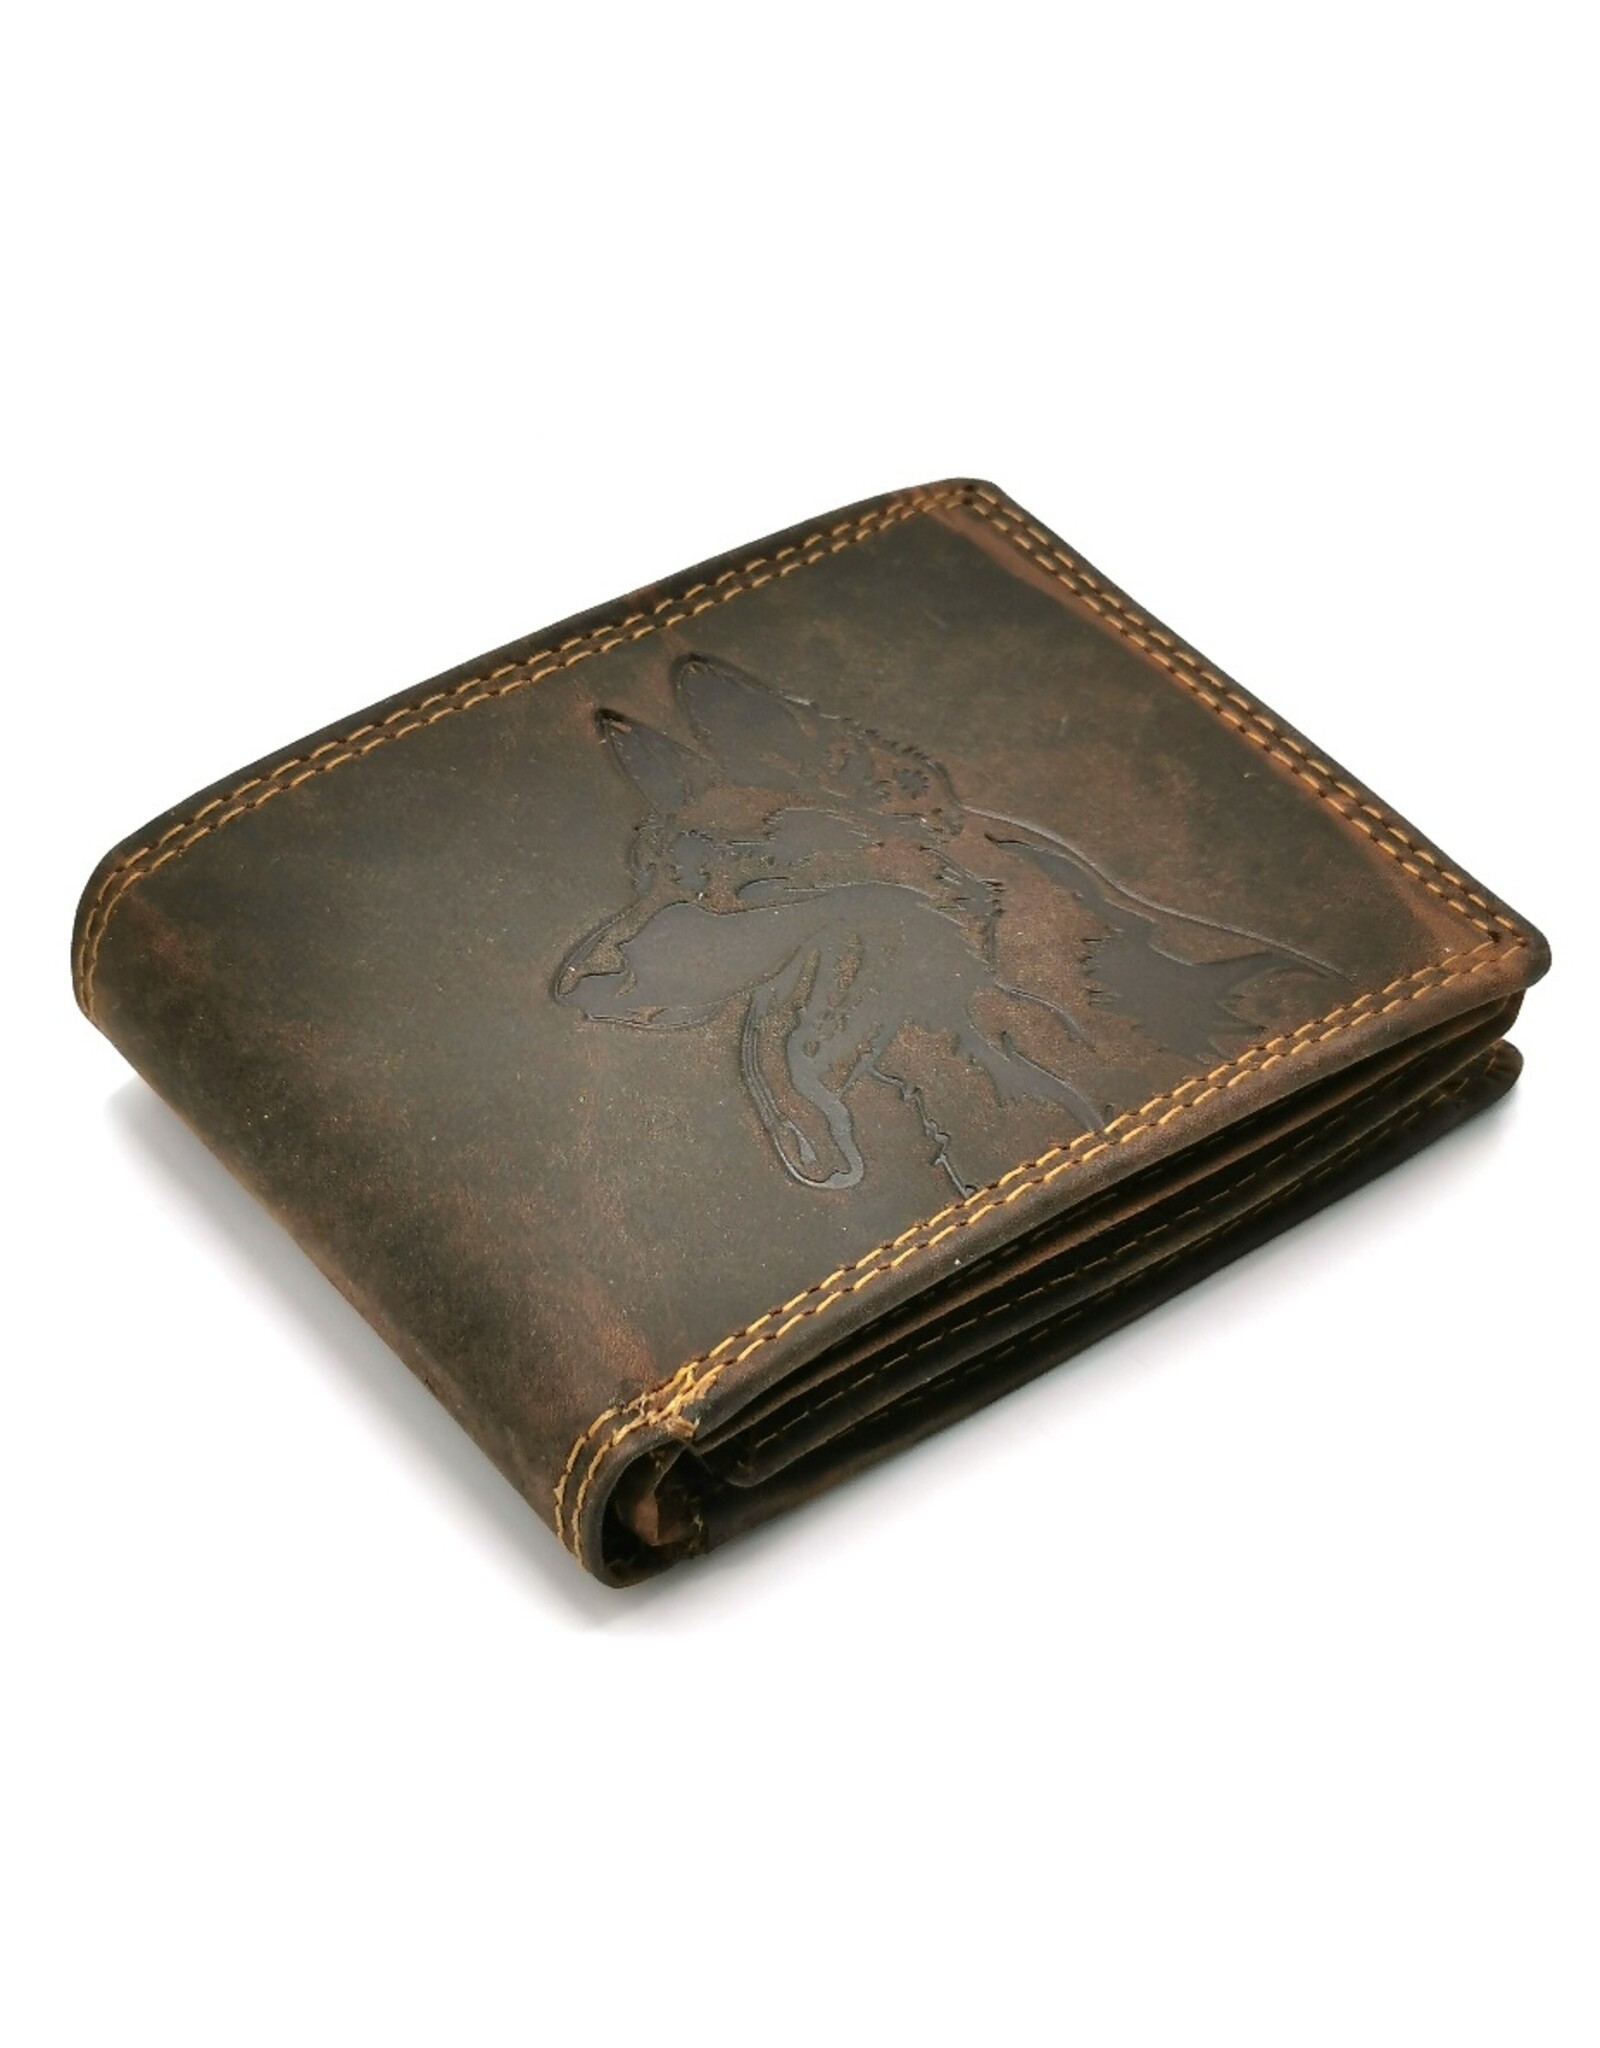 Wild Club Leather Wallets - Leather wallet with Shepherd dog RFID